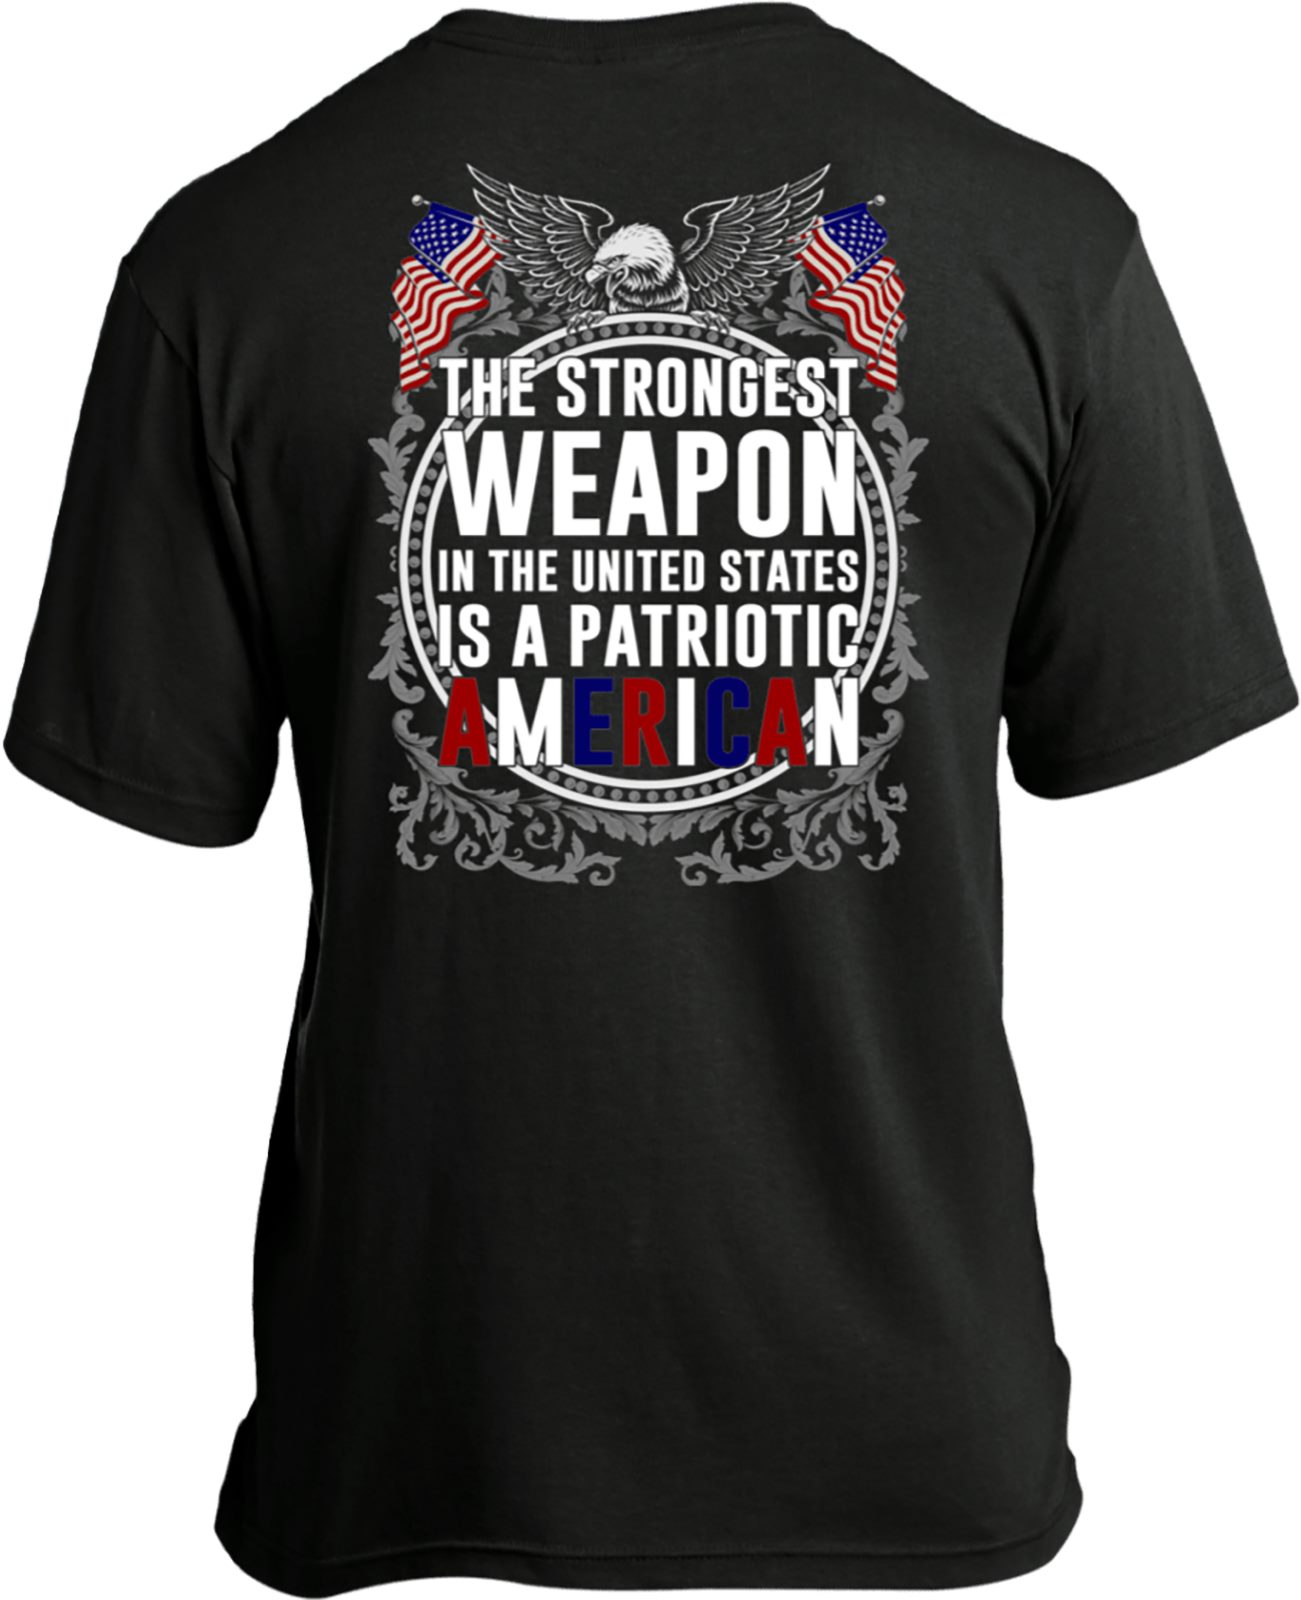 The strongest weapon in the united states is a patriotic American - American flag